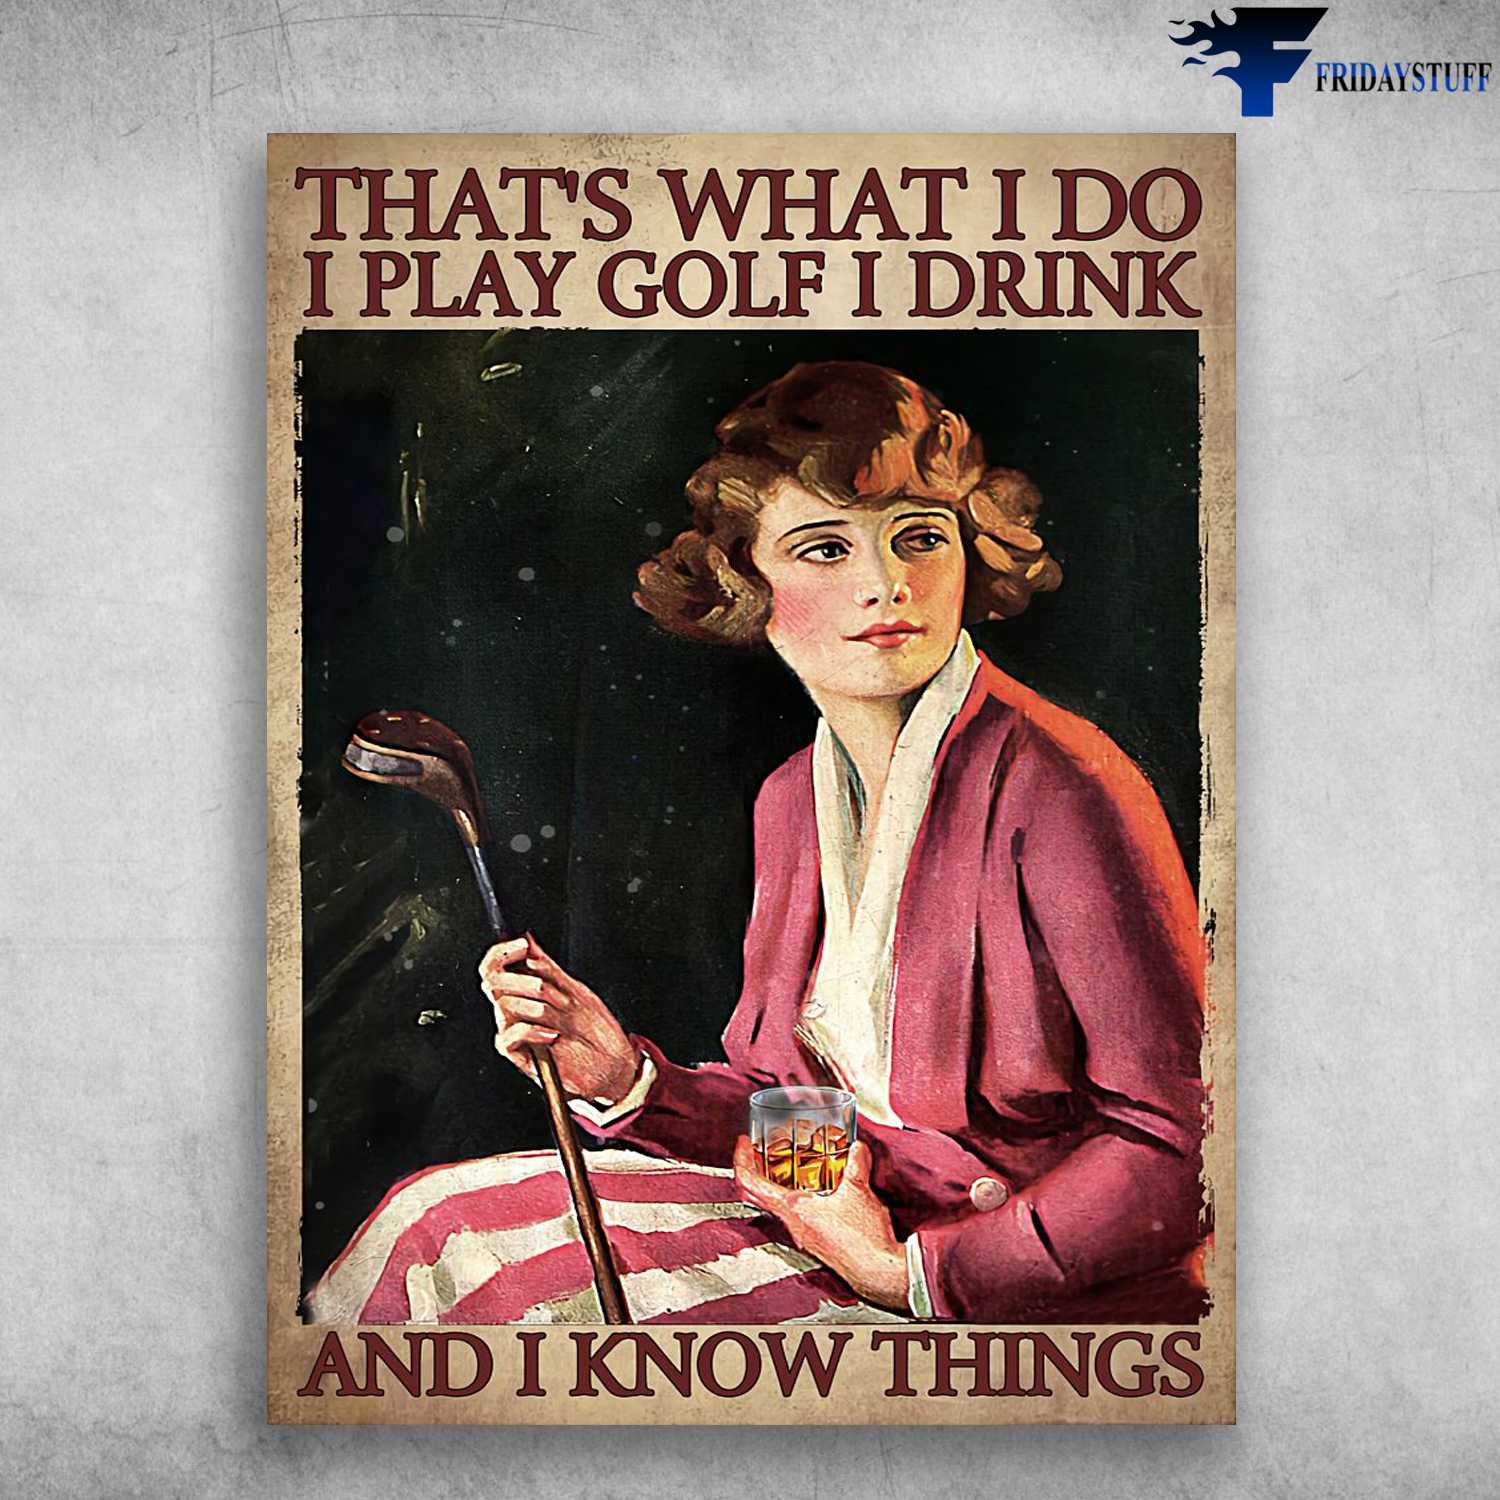 Golf And Drink, Golf Girl, Wine Lover - That's What I Do, I Play Golf, I Drink, And I Know Things